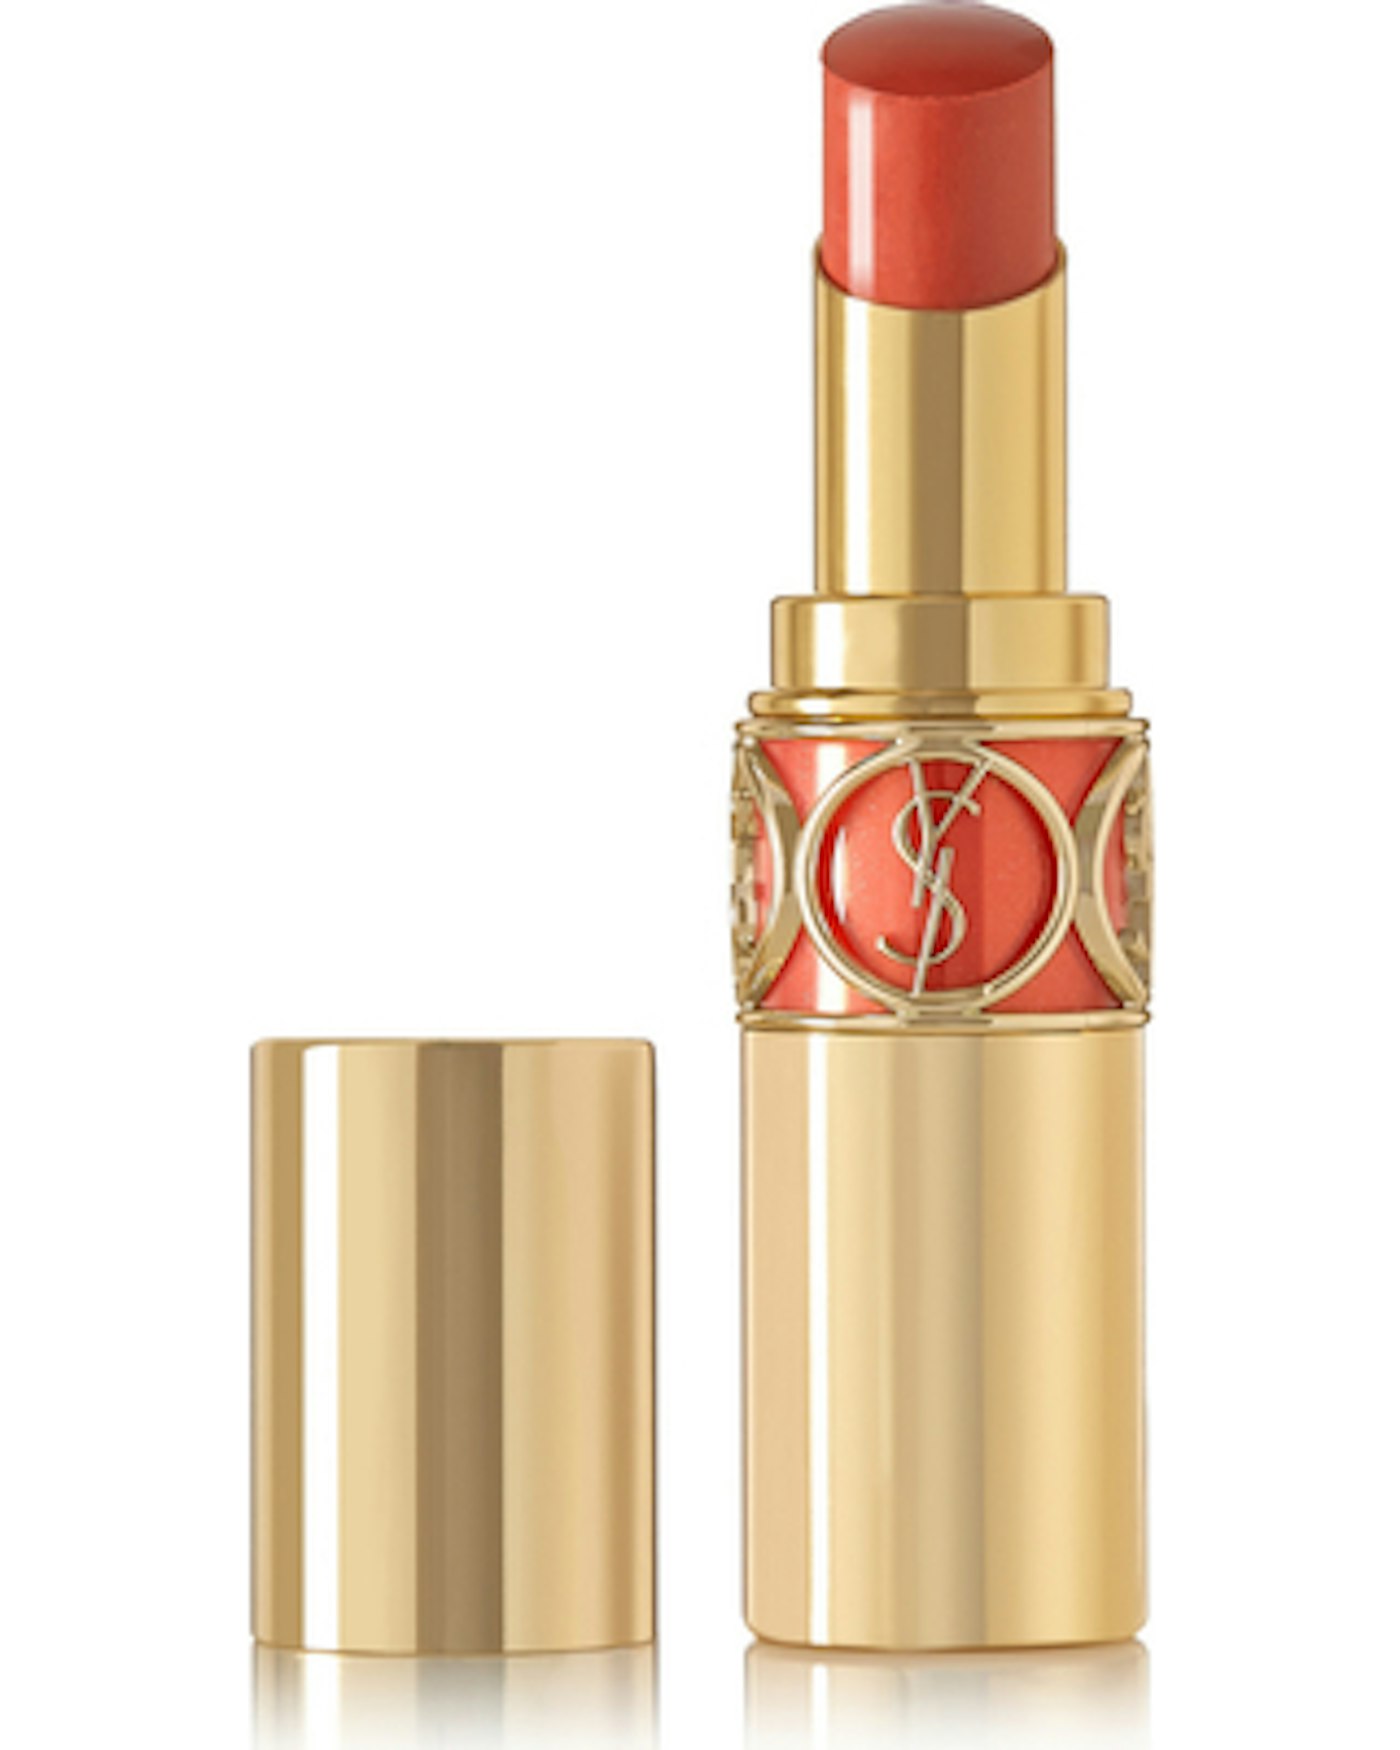 rouge-volupt-shine-lipstick-corail-intuitive-15-by-yves-saint-laurent-beauty